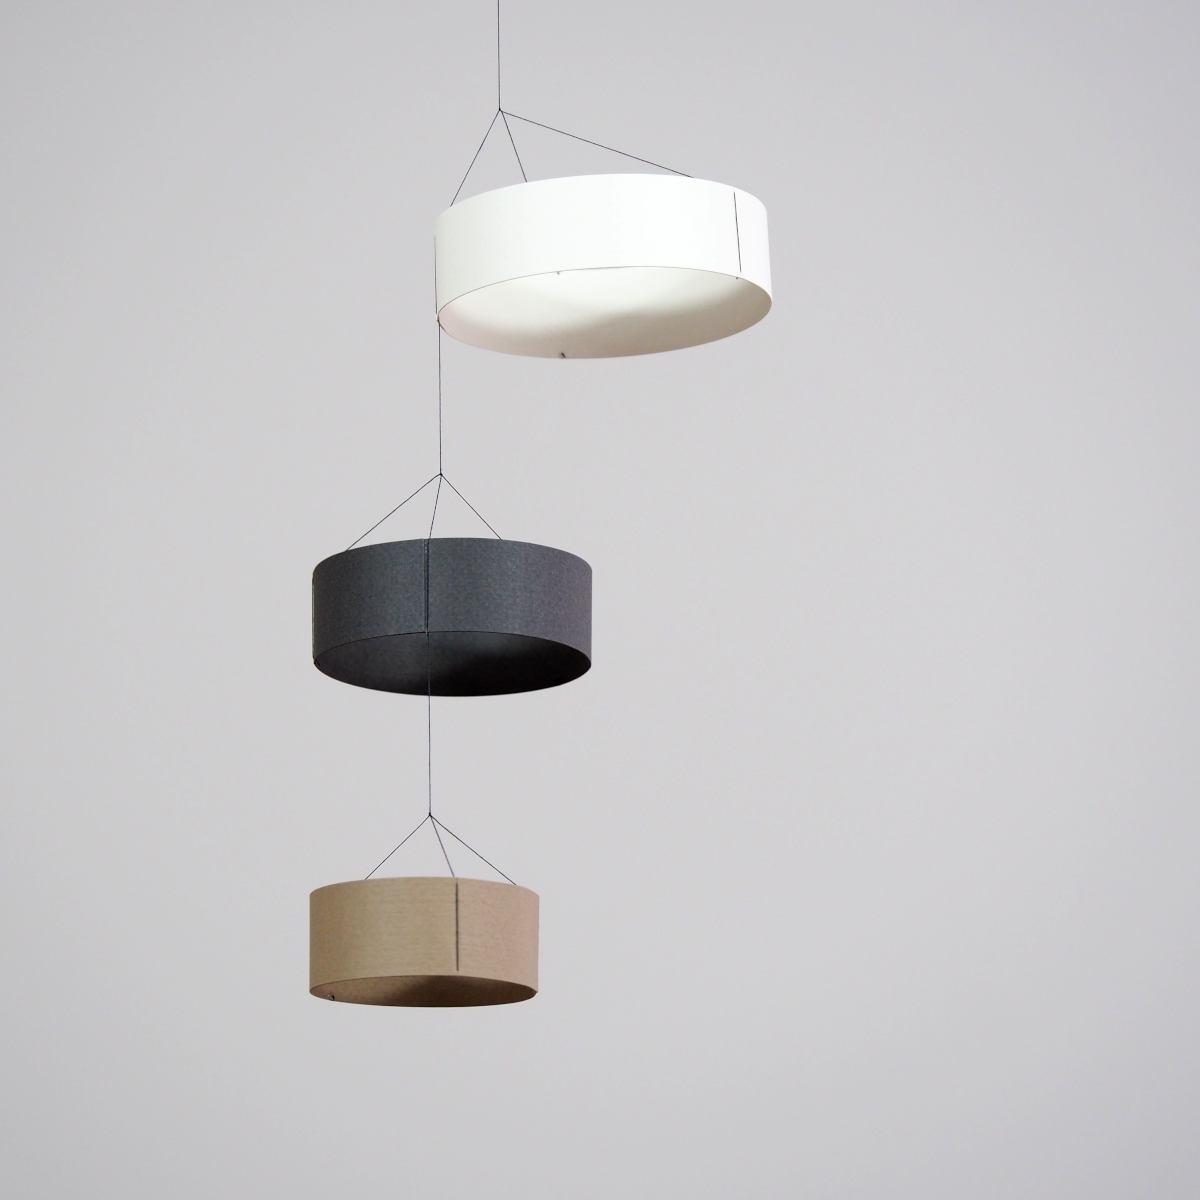 Stylish Hanging Mobile "Rings", handmade of Paper – Brown (25 x 50 cm)